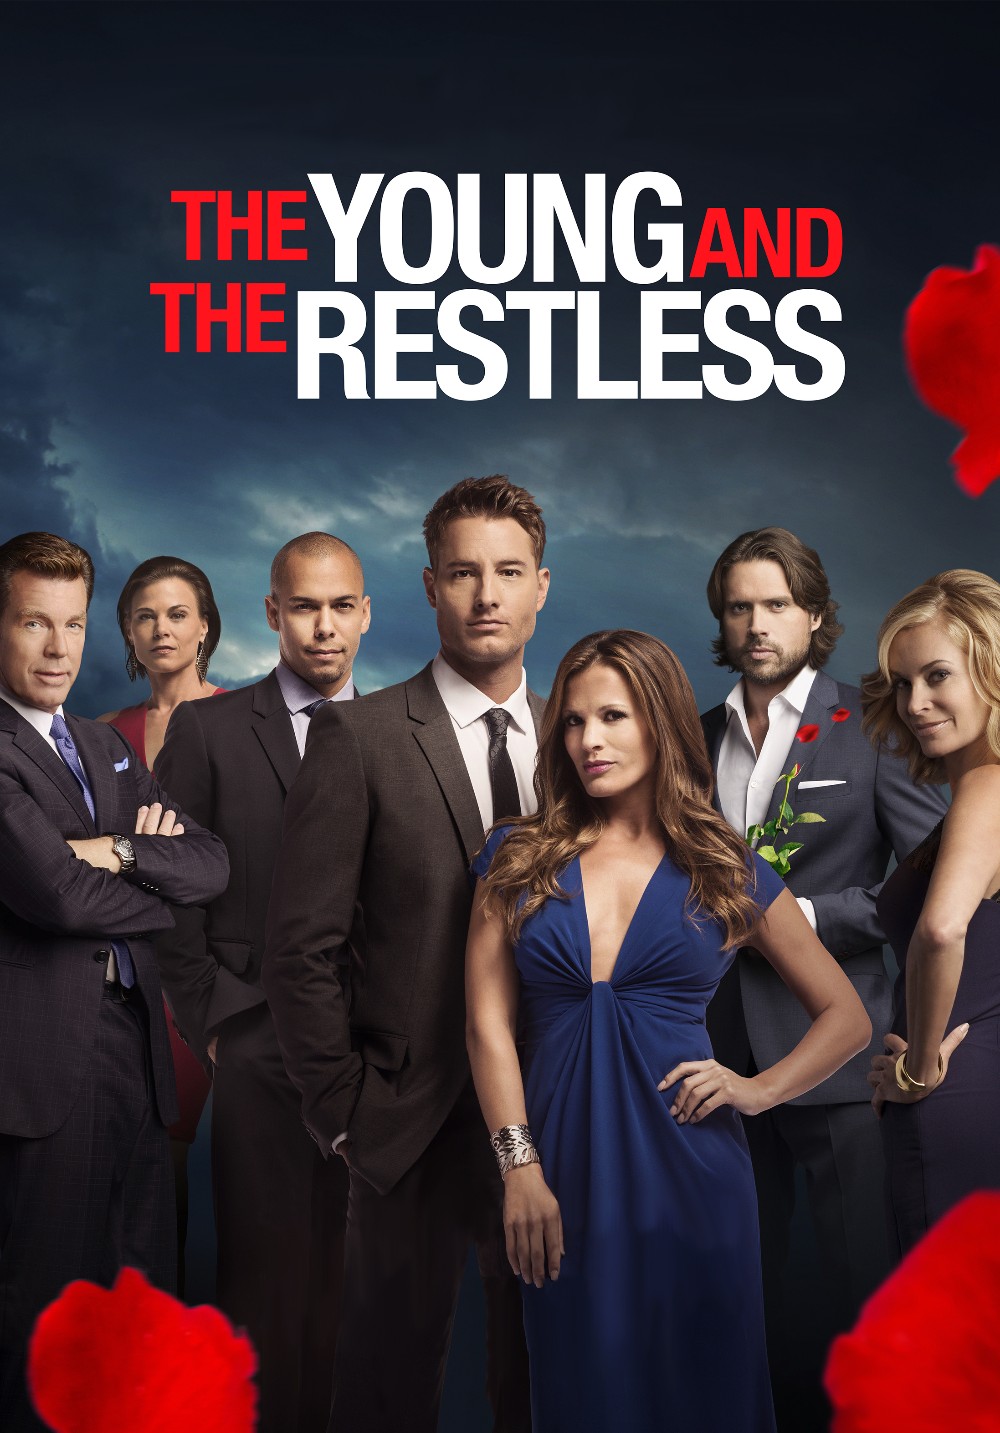 The Young and the Restless S51E61 [1080p] (x265) 7a8bf5561d194499c221a43fad448bf5